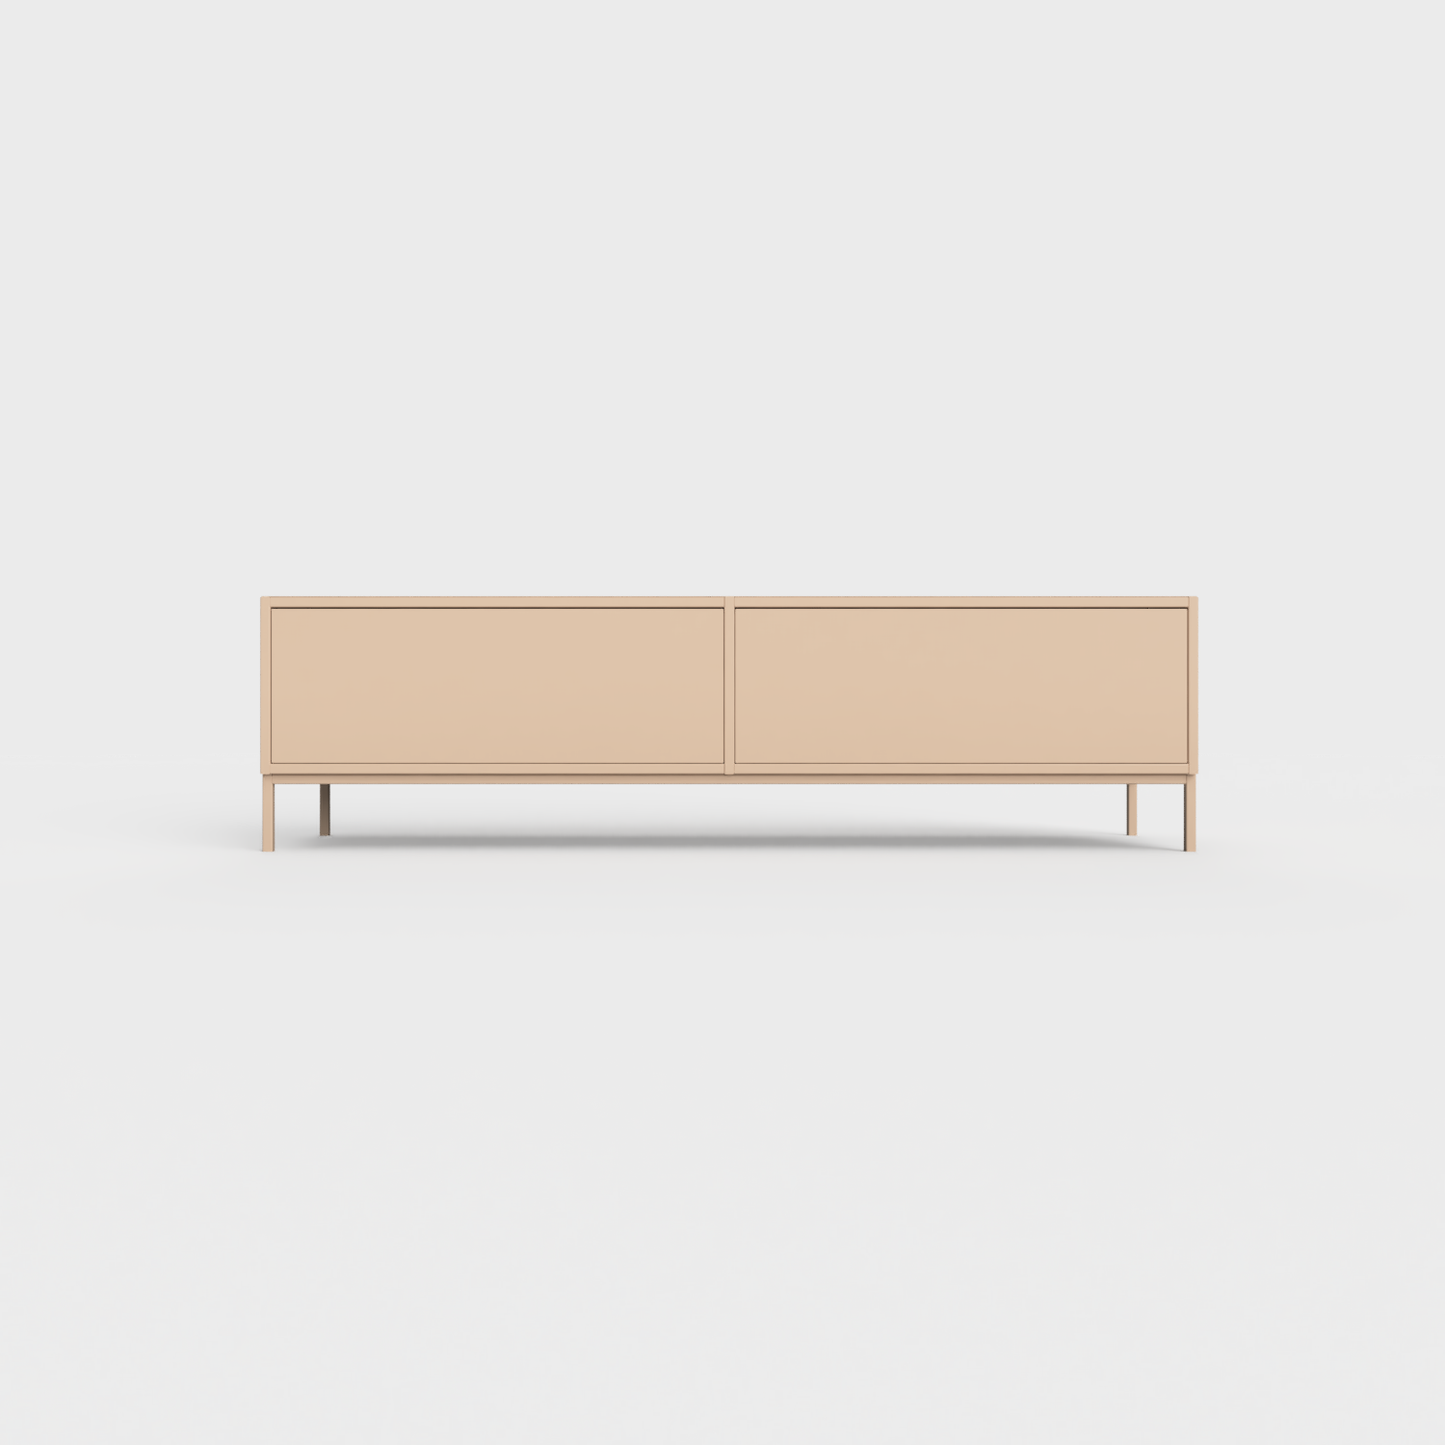 Prunus 01 Lowboard in Pastel Salmon color, powder-coated steel, elegant and modern piece of furniture for your living room